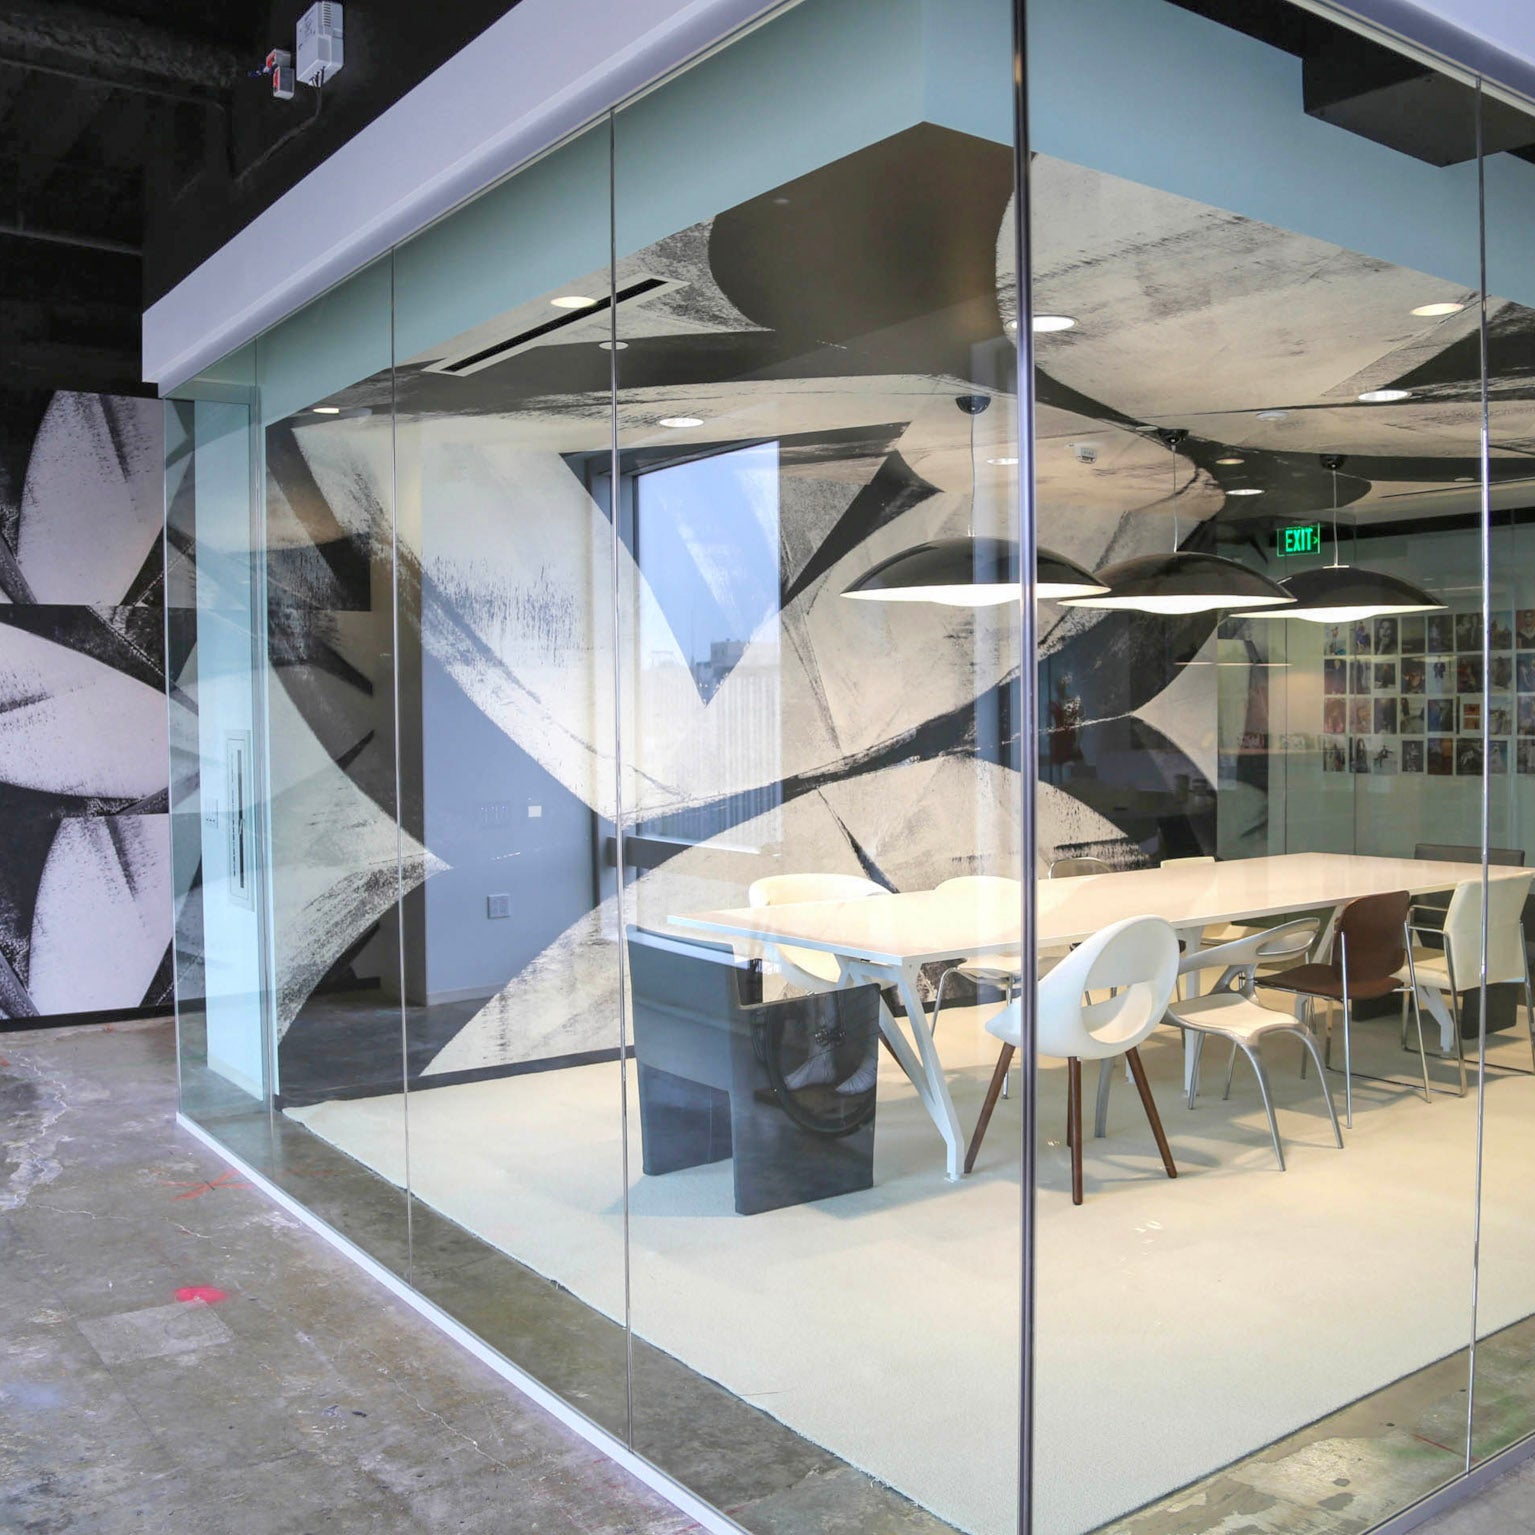 View through transparent walls of a meeting space at Brookfield Design Hive, accented by WRAPPED Studio's black-and-white mural, reflecting the innovative spirit of the Los Angeles architecture scene.